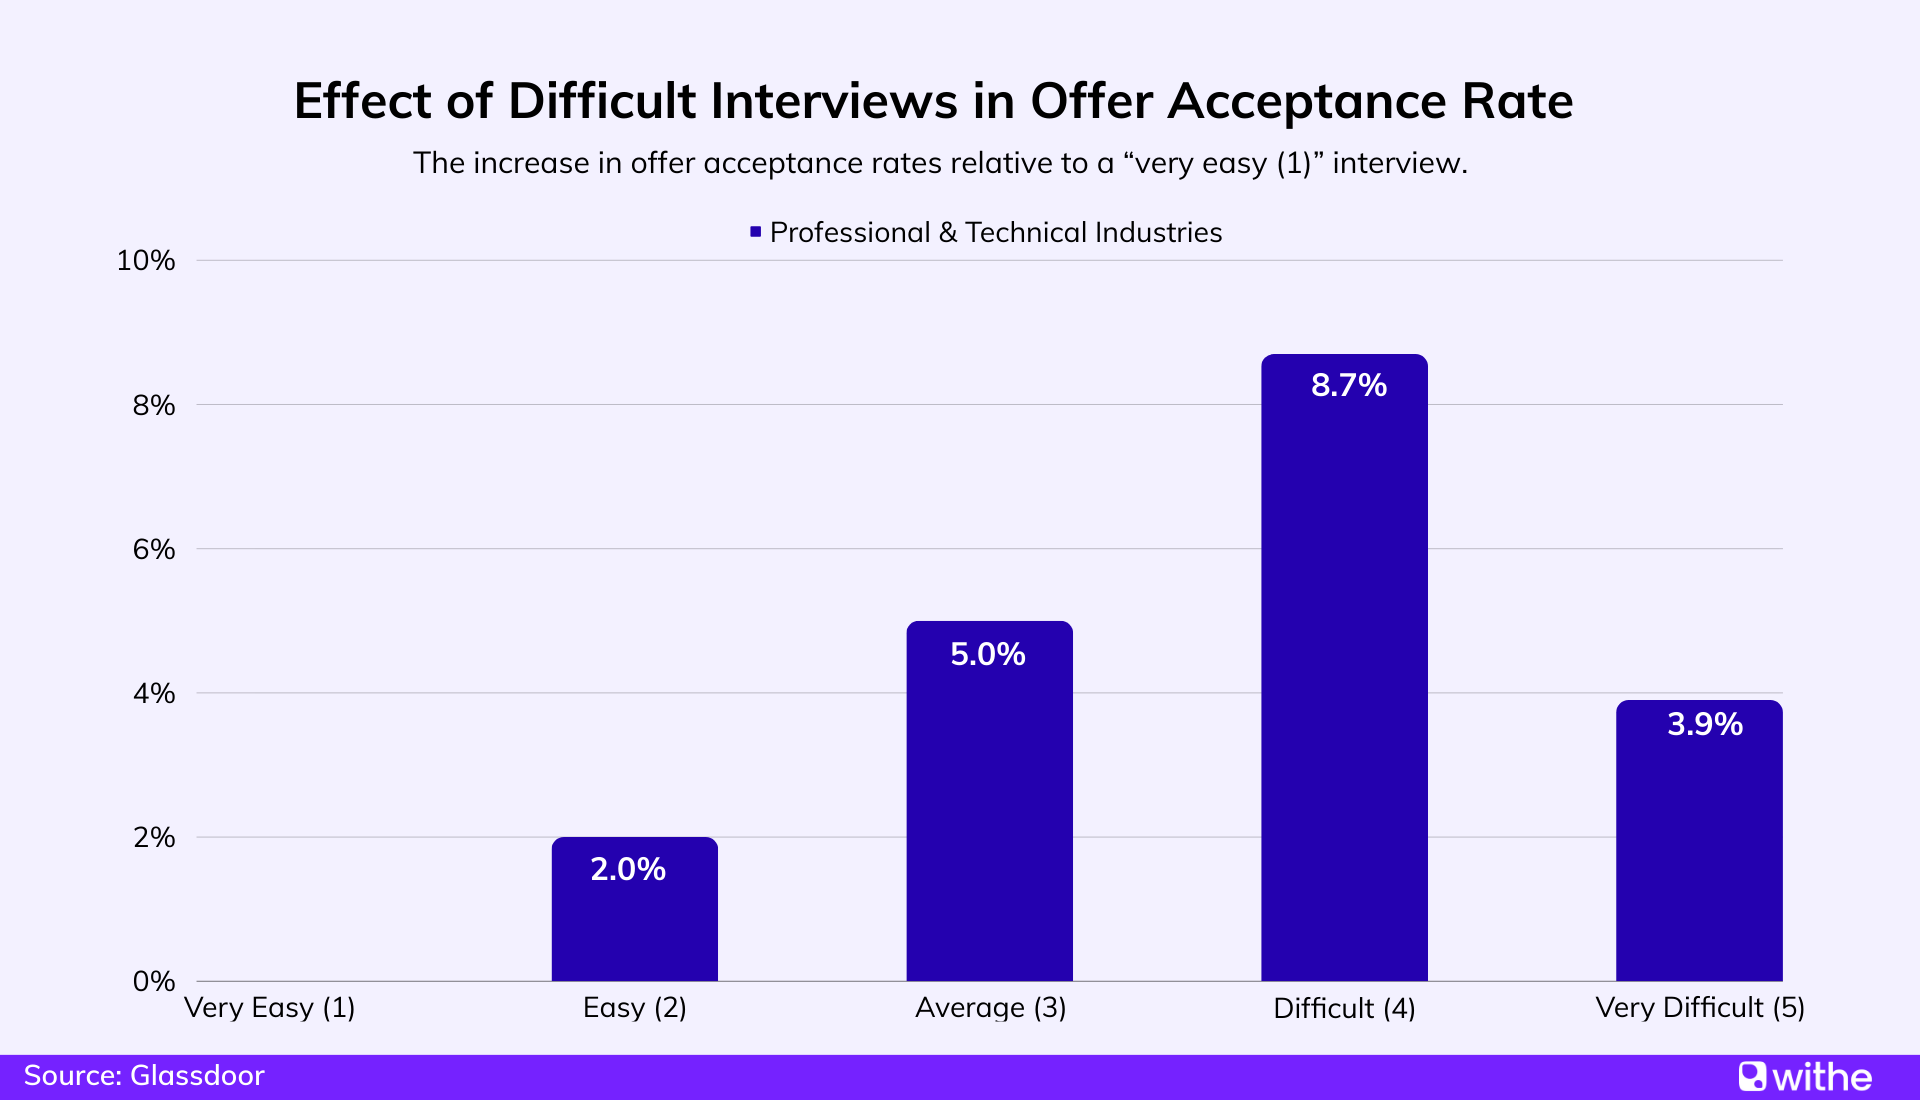 Job offer statistics - Effect of difficult interviews in offer acceptance rate